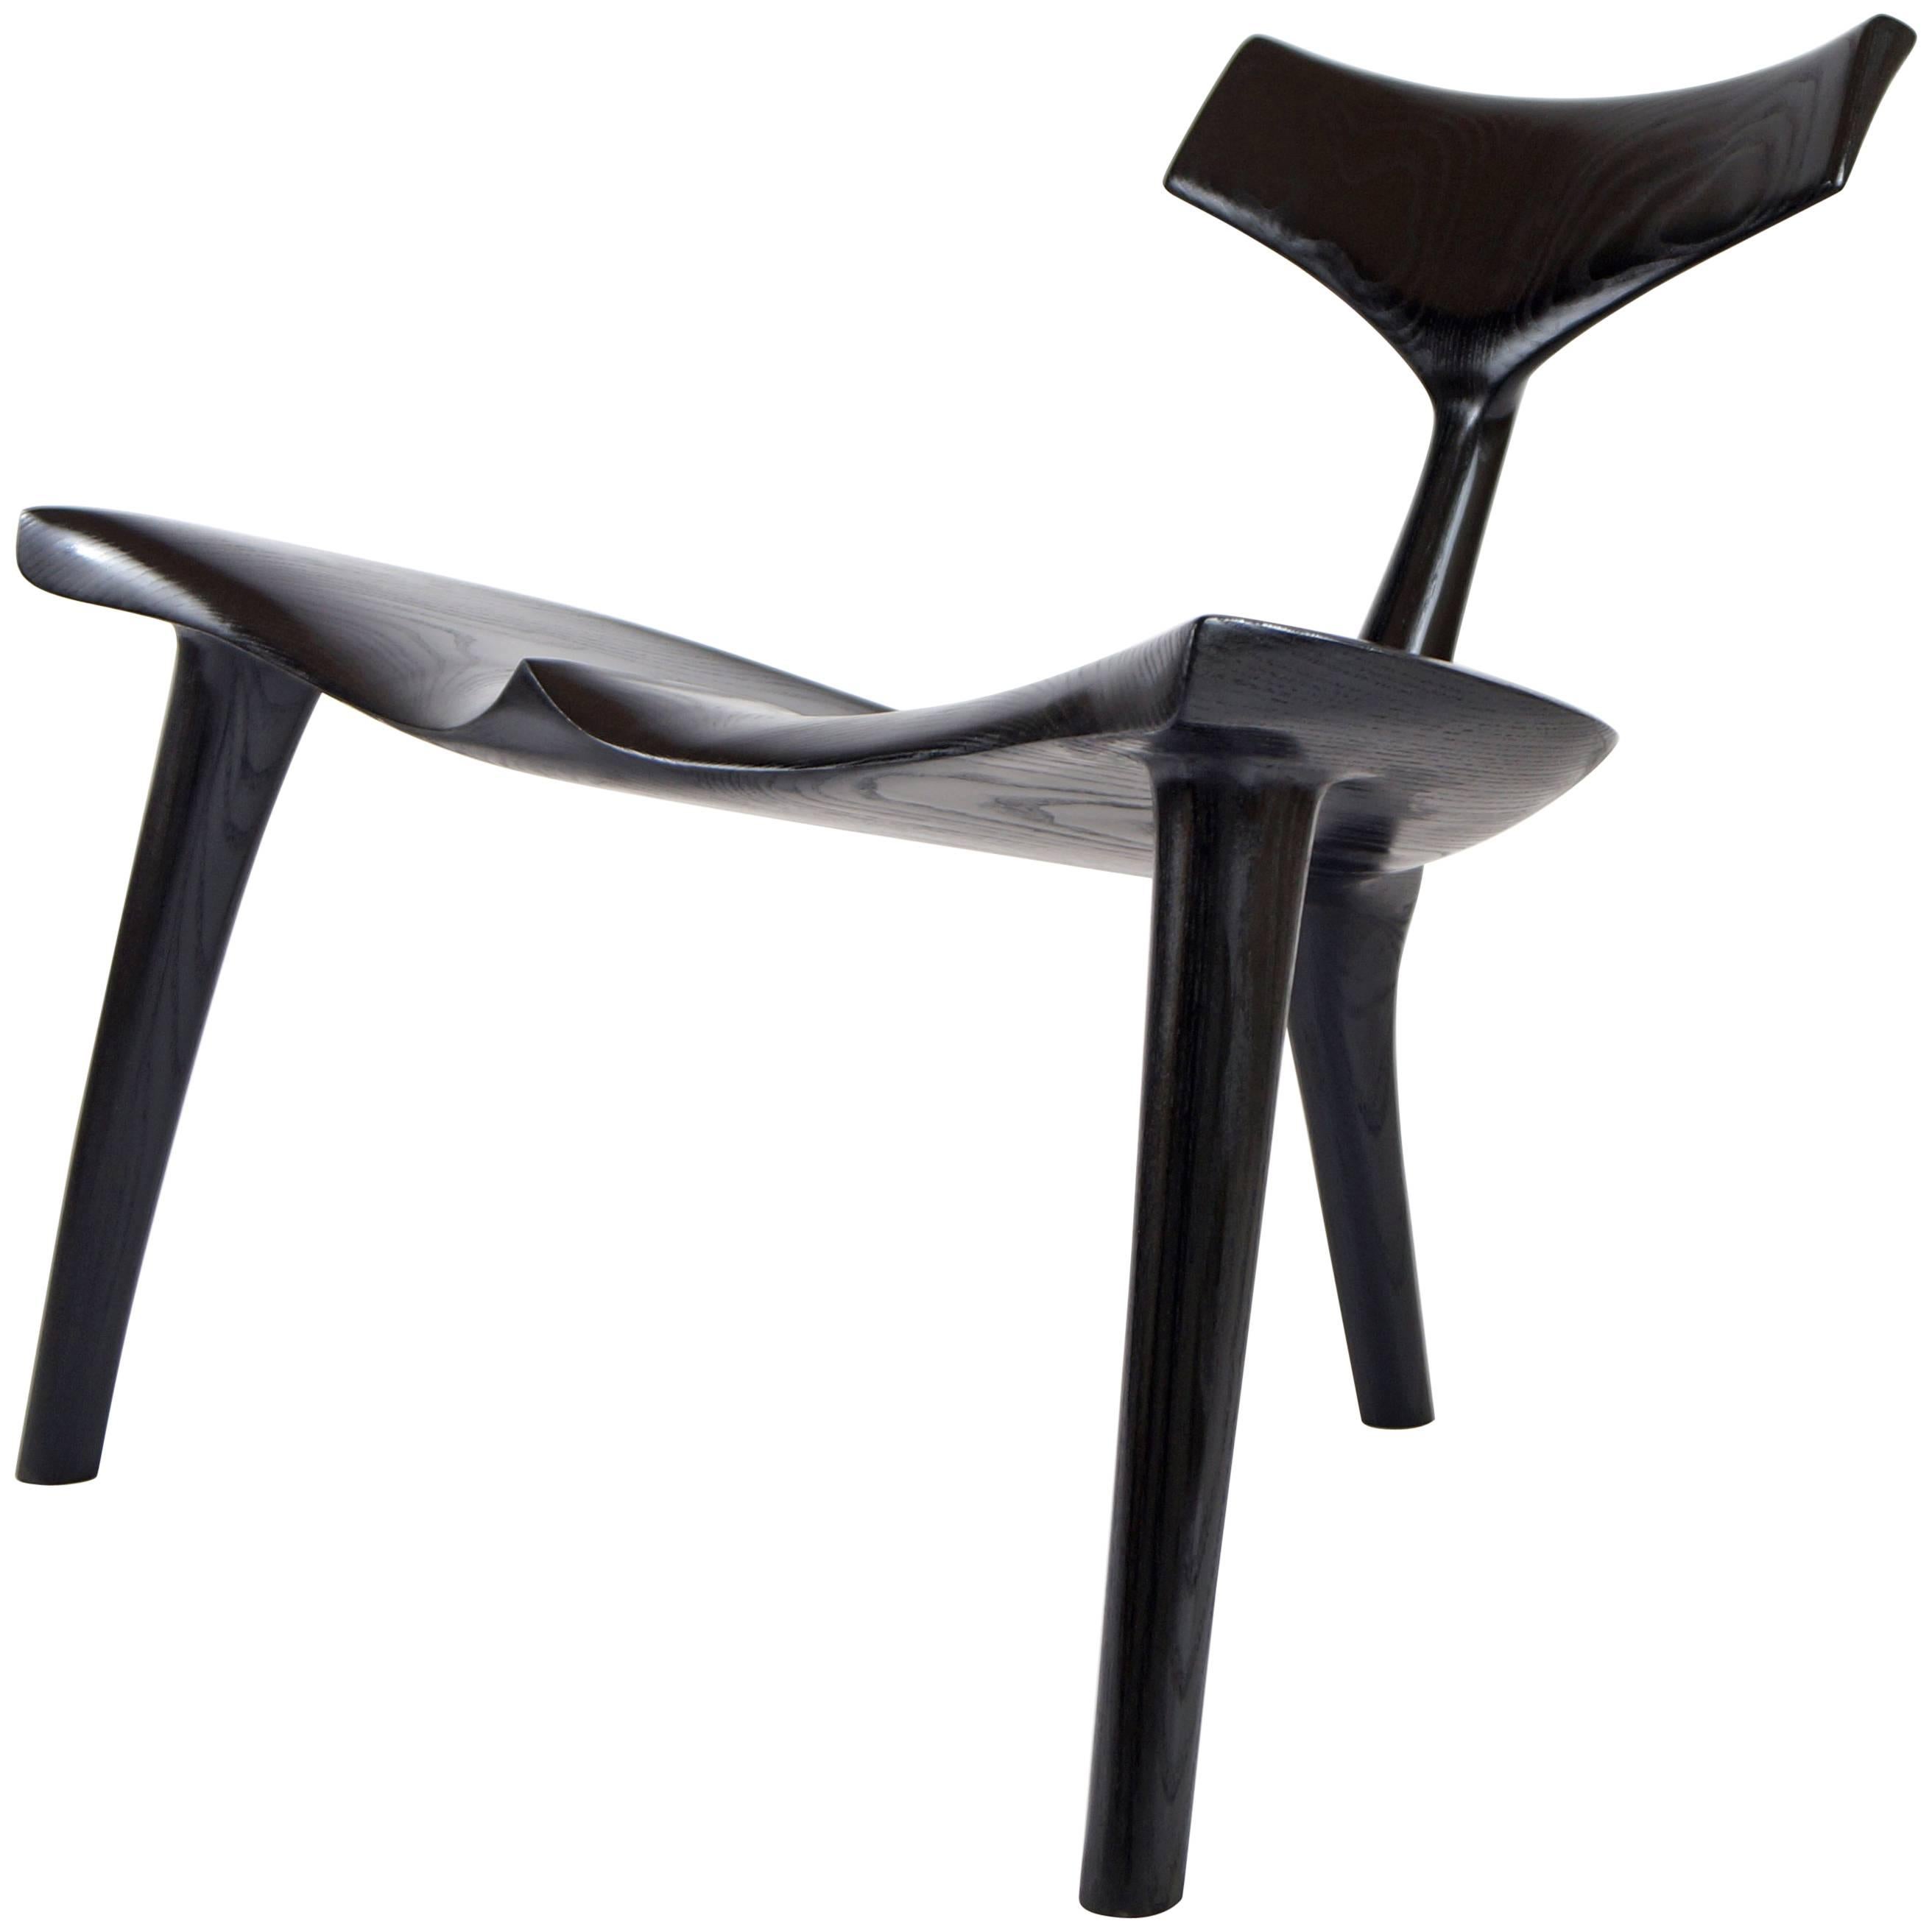 Black Ash Whale Chair MS82, Handcrafted and Designed by Morten Stenbaek